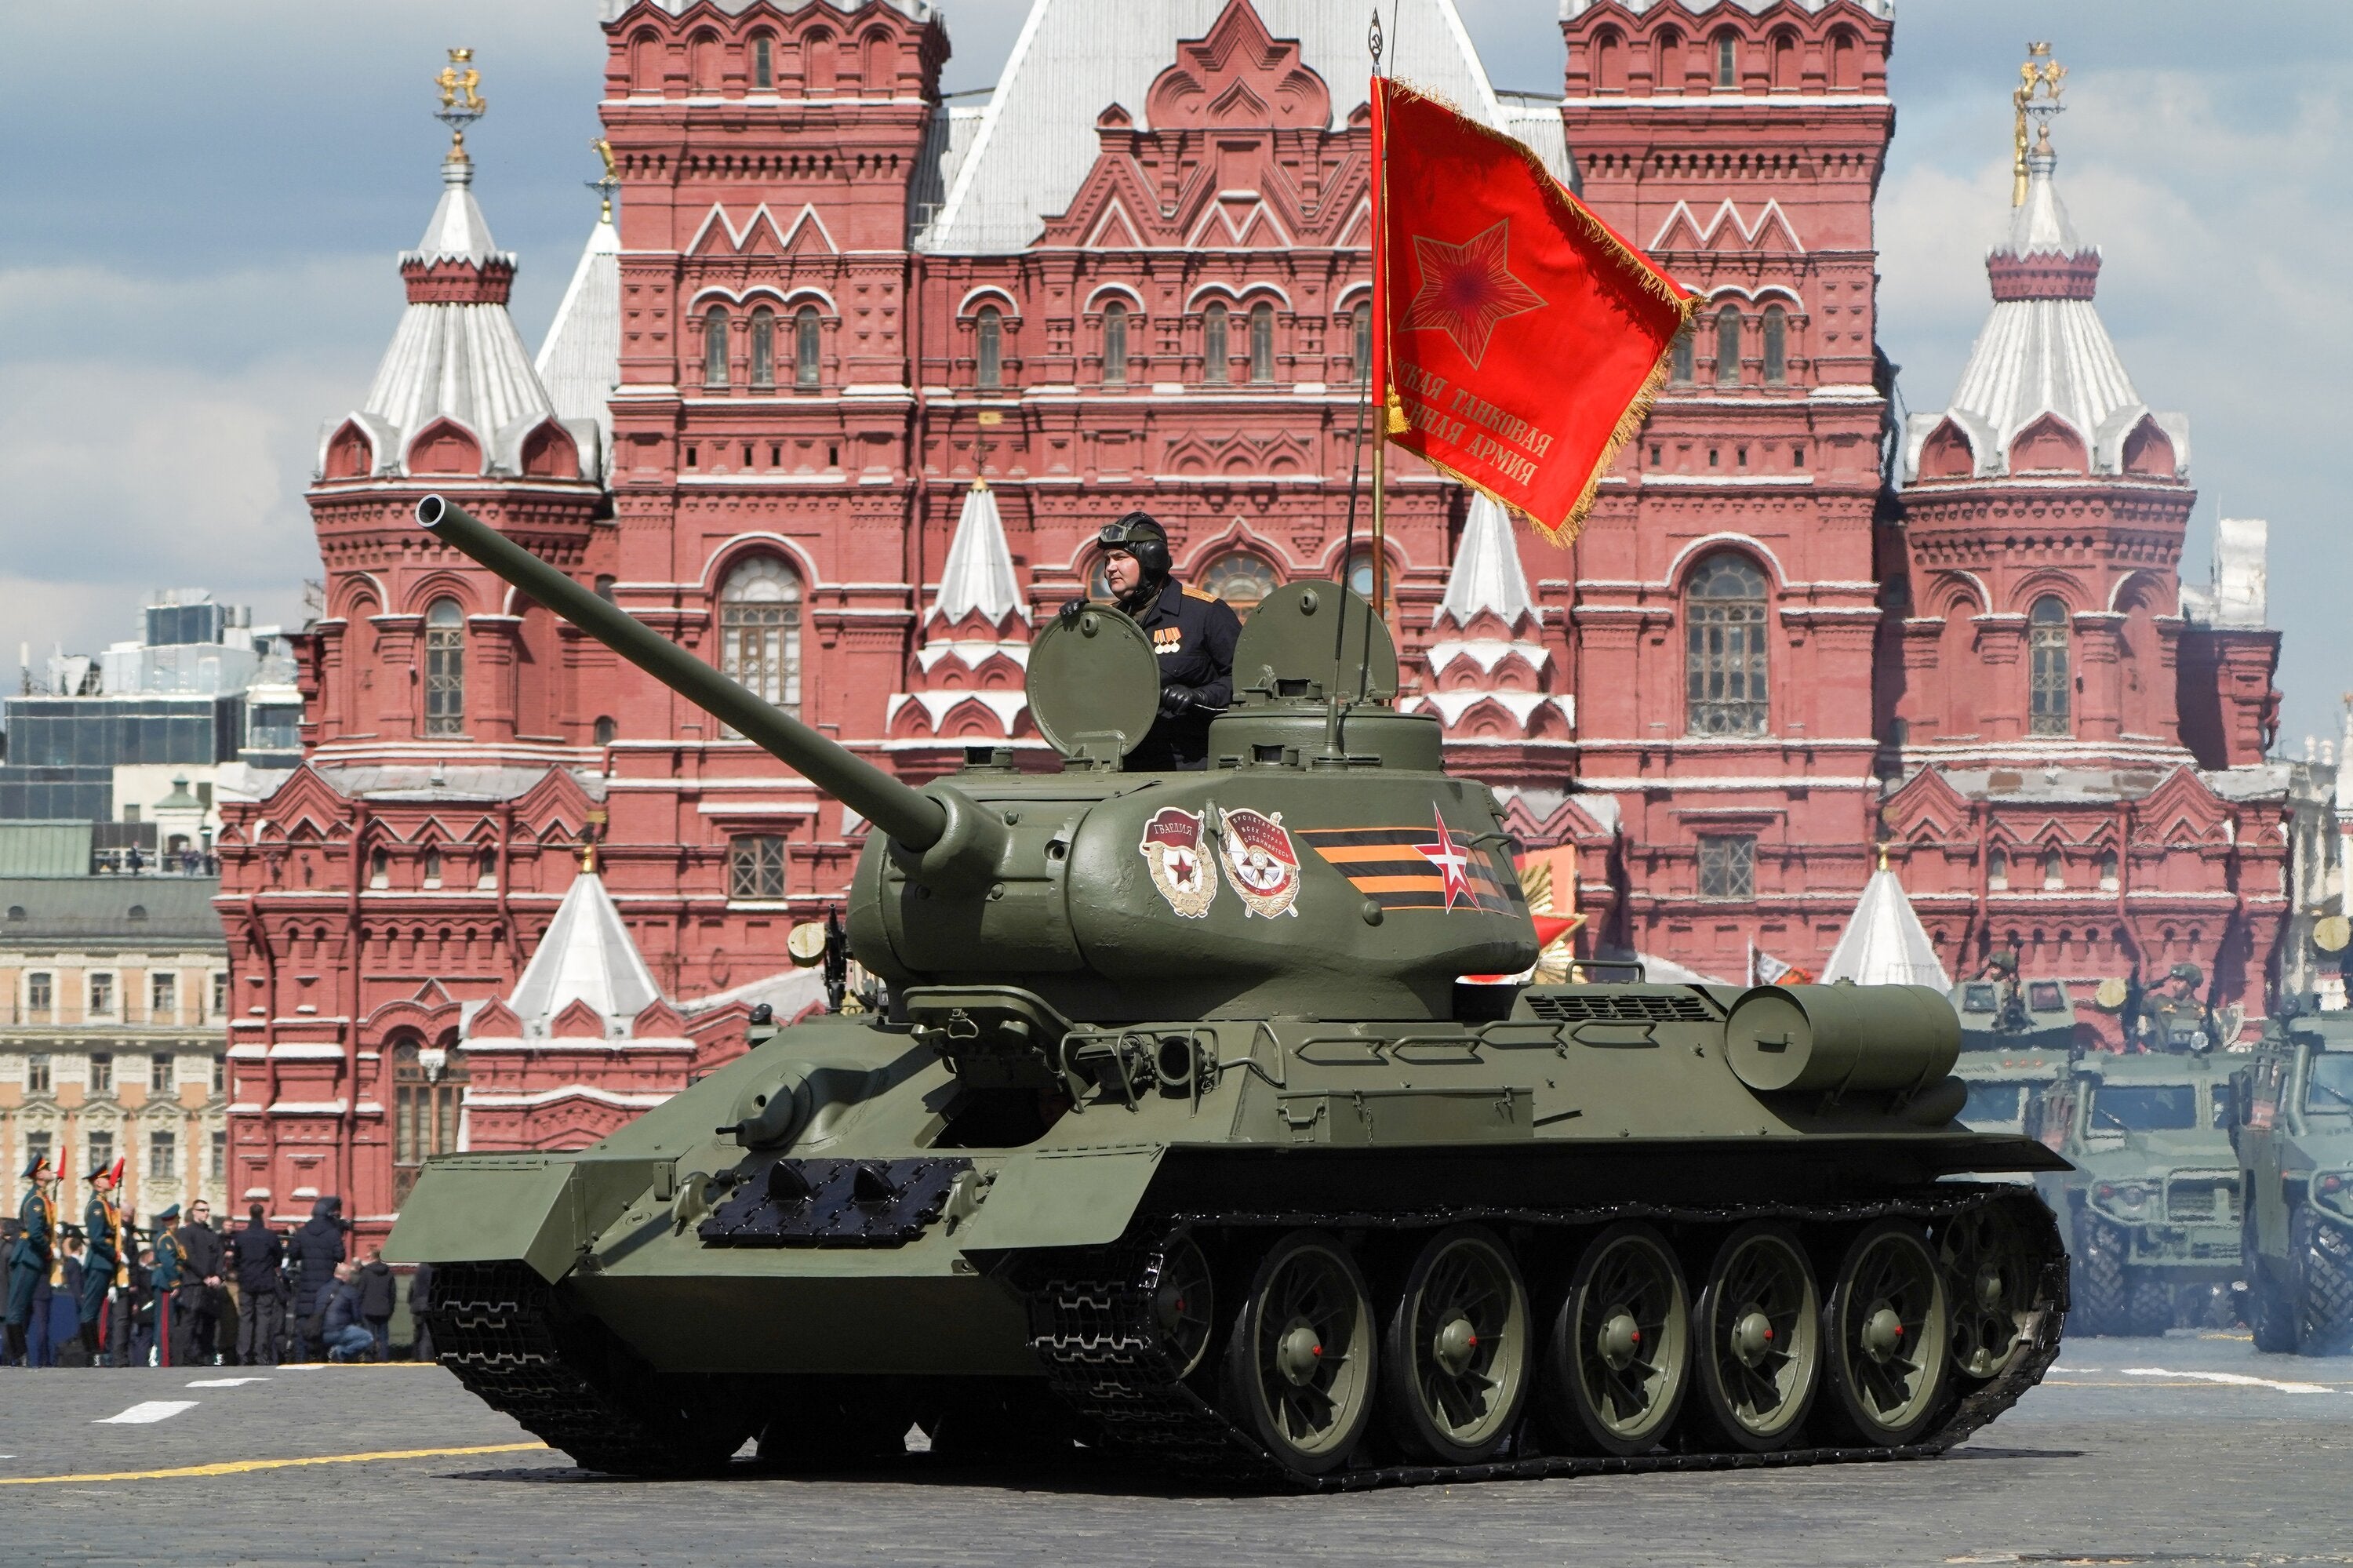 The sole T-34 tank in the parade